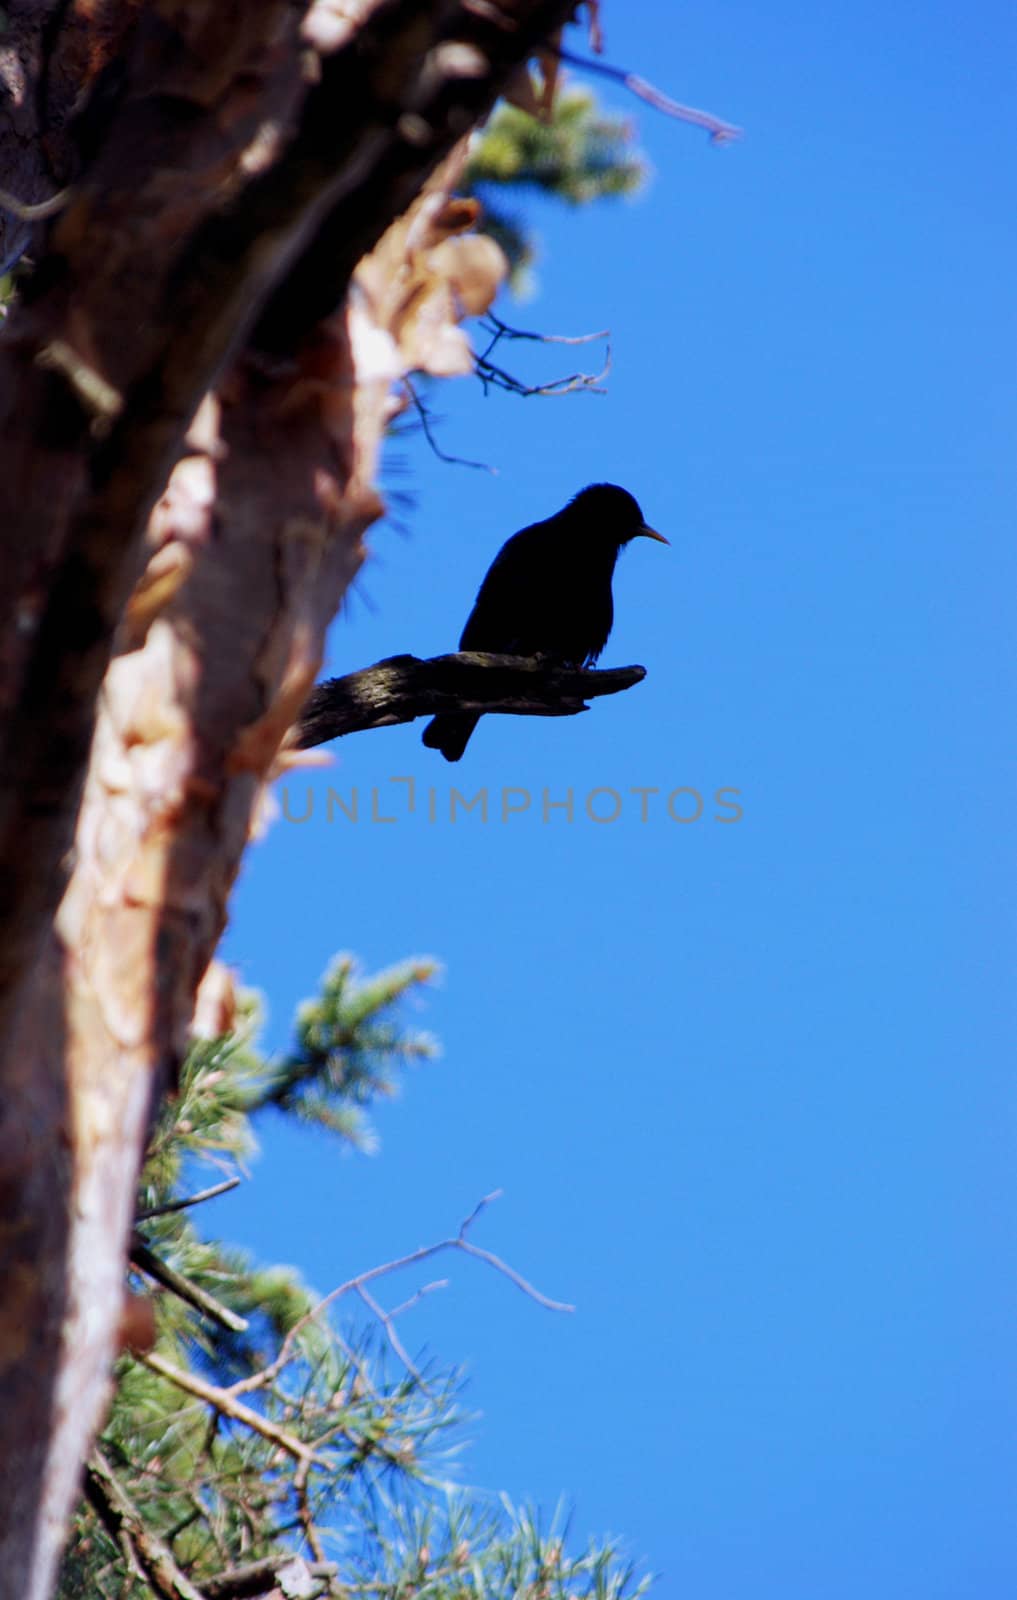 Black silhouette of starling on the little branch in background of blue sky